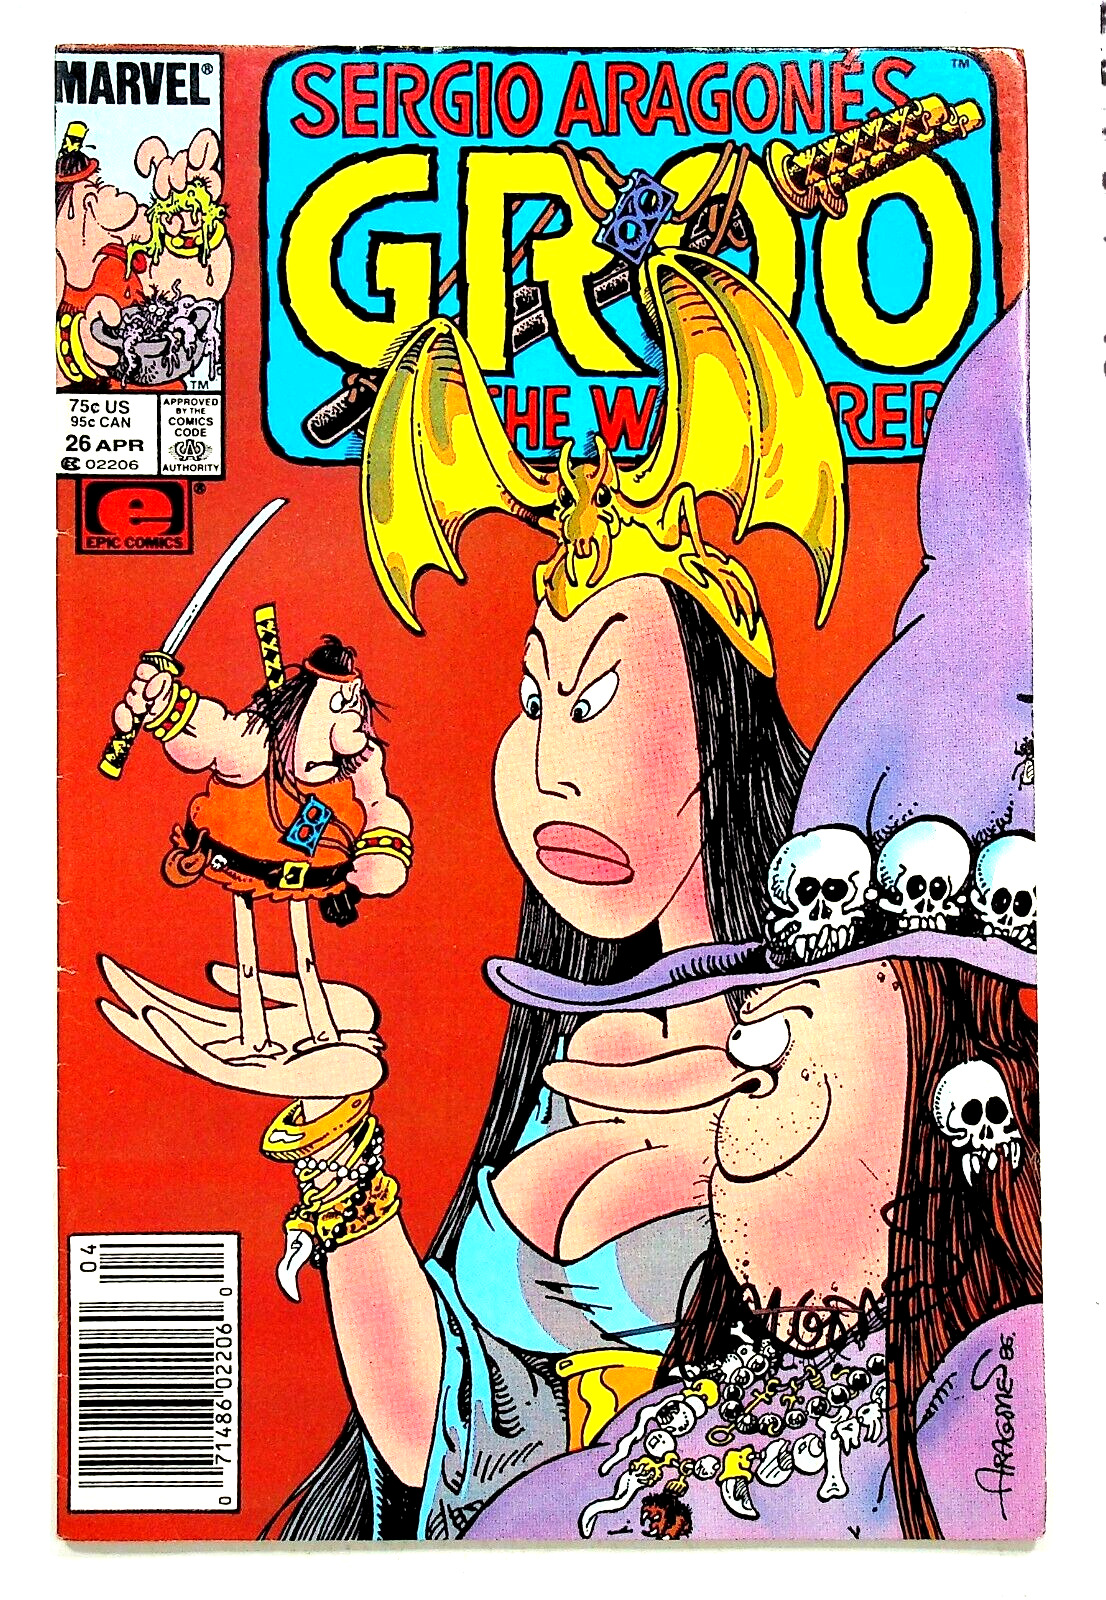 Groo the Wanderer #26 Signed by Sergio Aragones Newsstand Marvel Epic Comics 24.